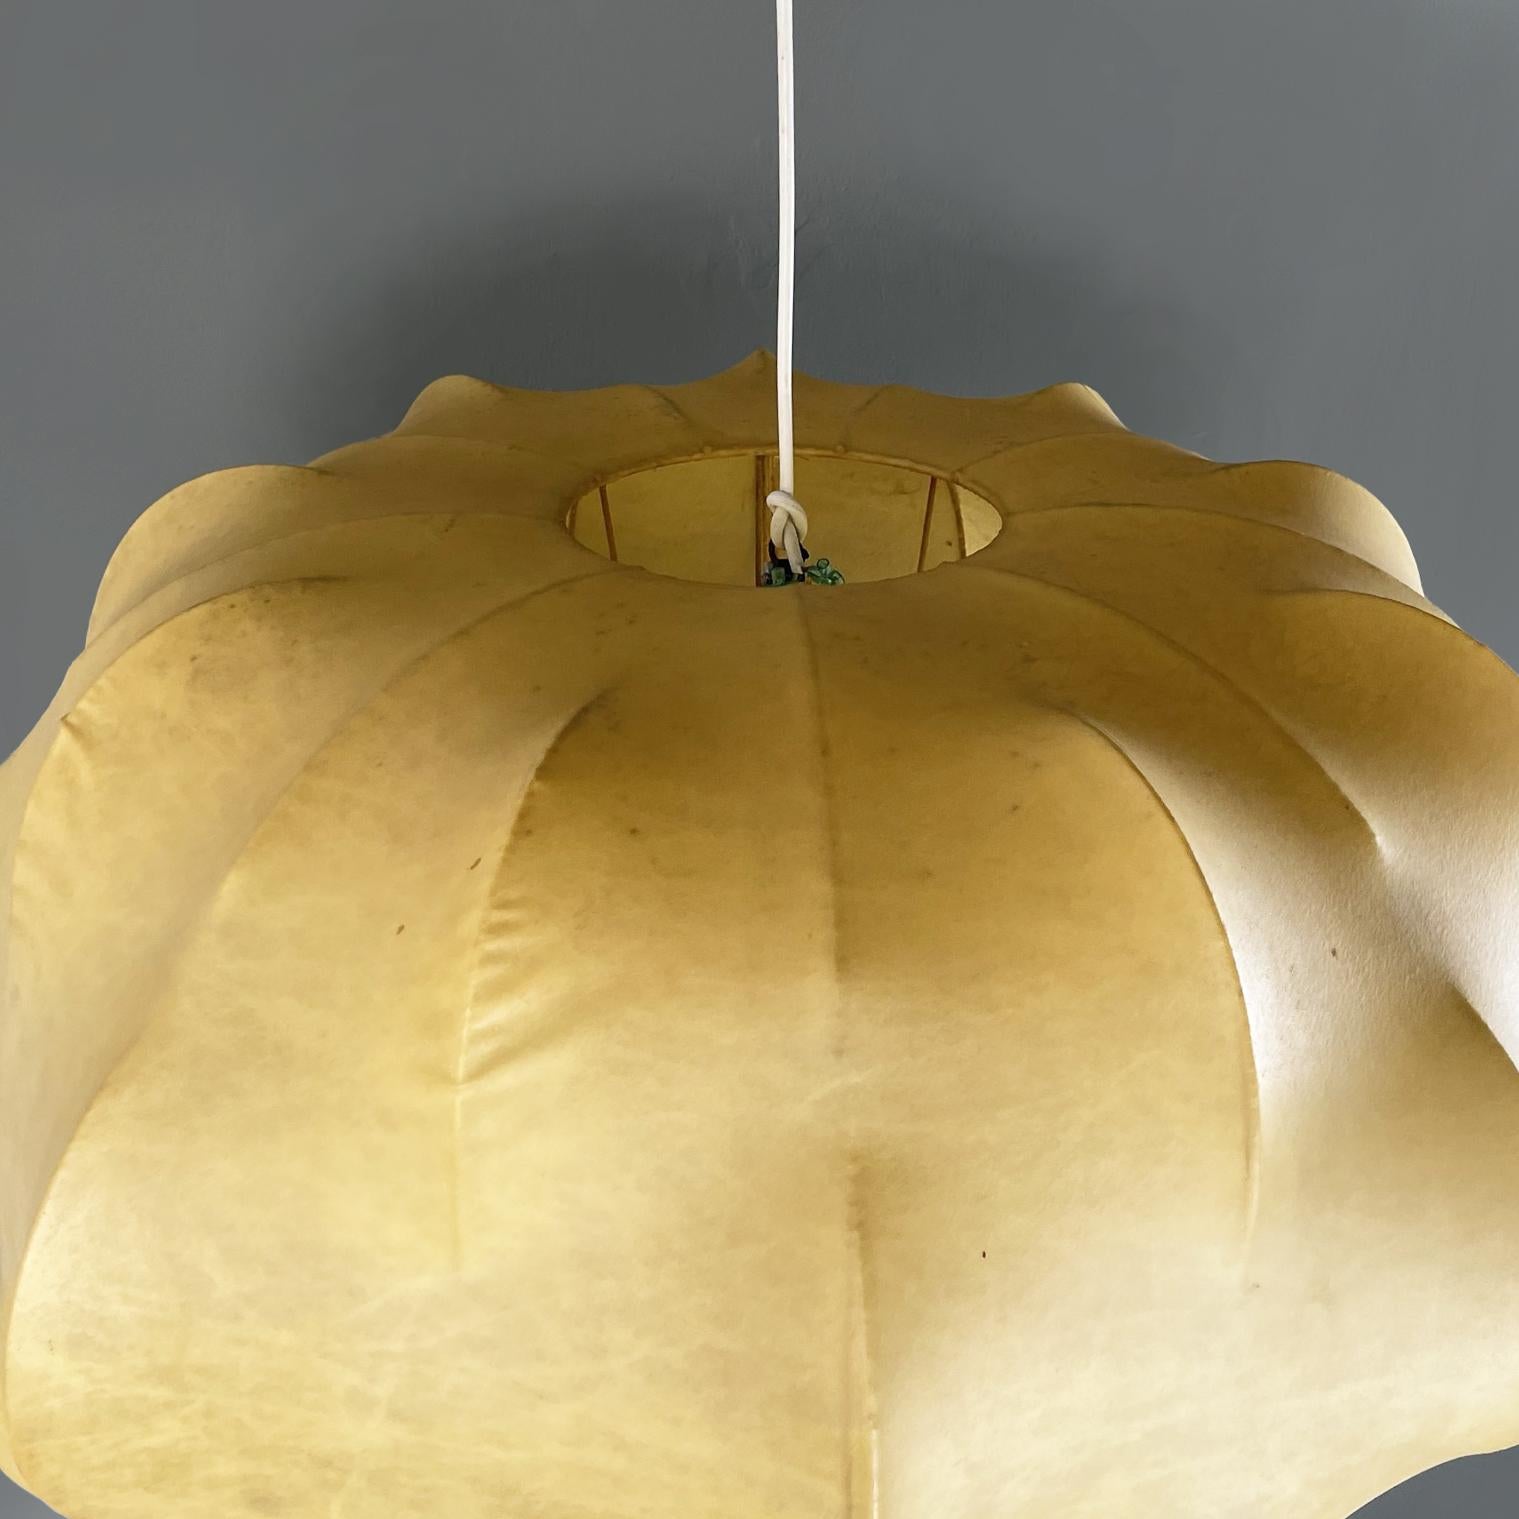 Italian modern cocoon and metal Chandelier Nuvola by Tobia Scarpa for Flos 1970s For Sale 2